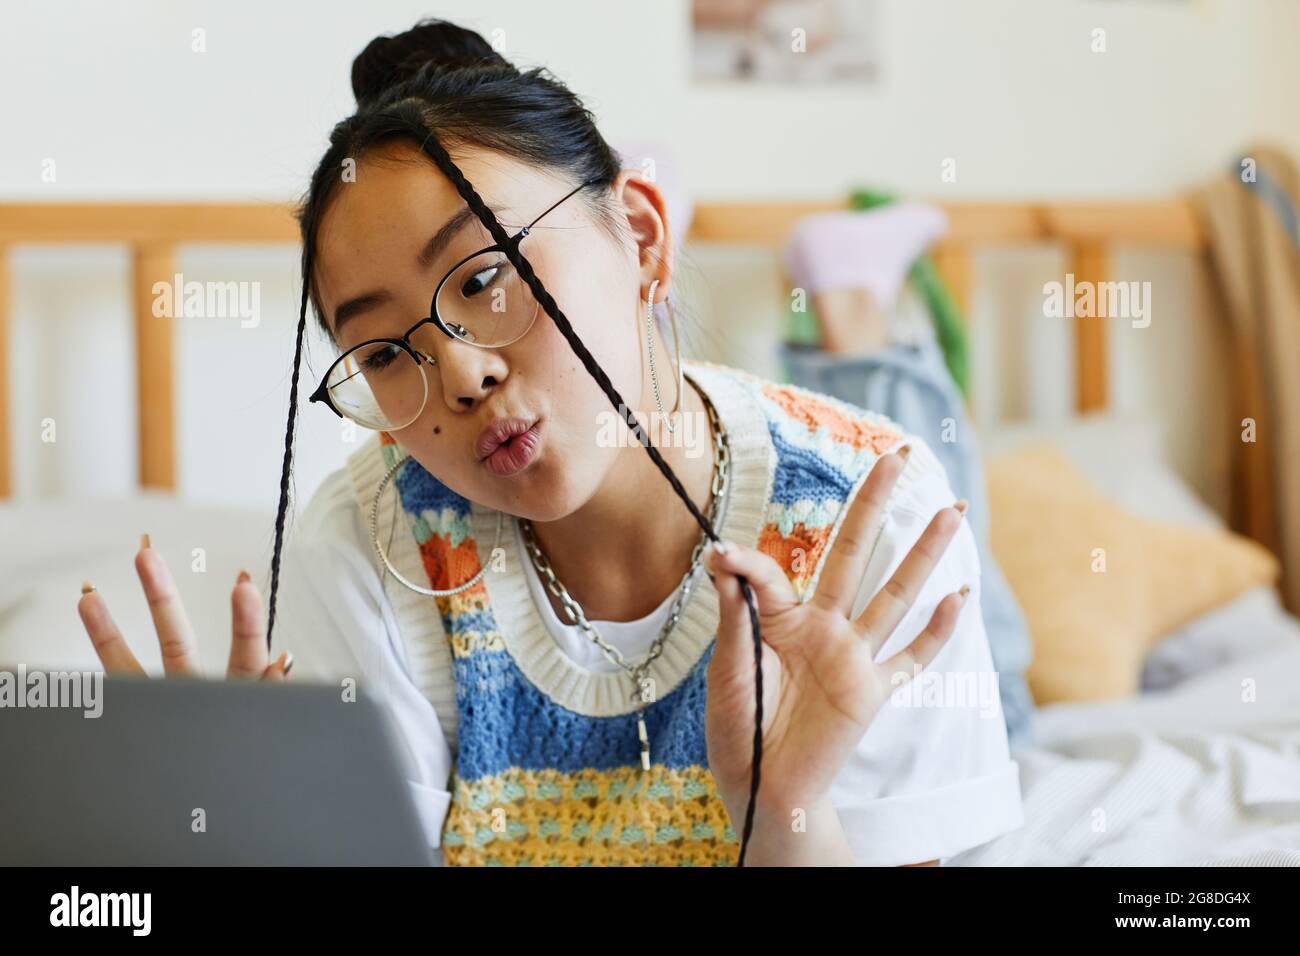 portrait of teenage asian girl using laptop on bed in cozy room interior and making cute faces to camera by video chat or livestream 2G8DG4X